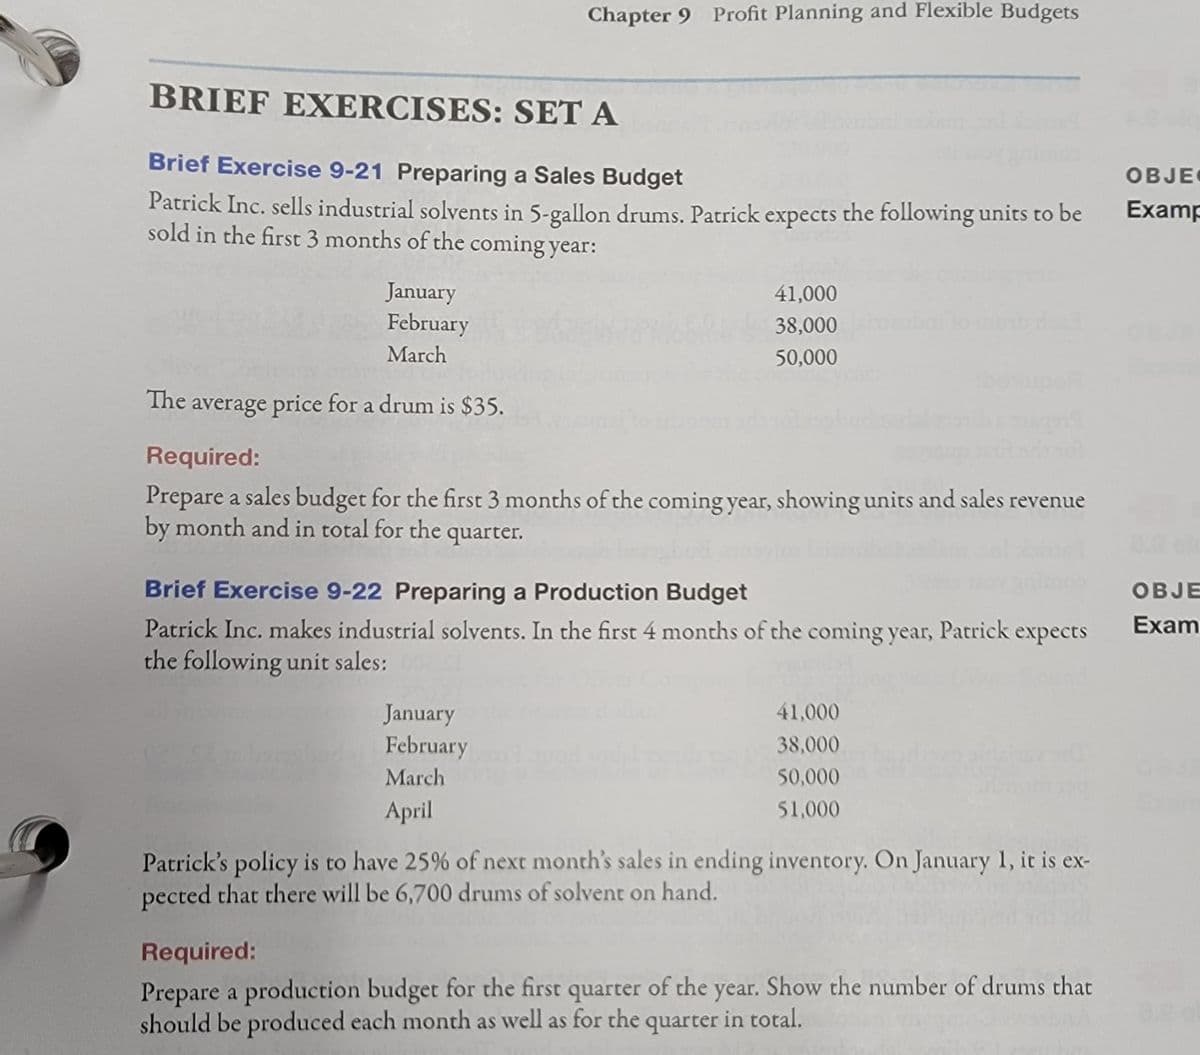 Chapter 9 Profit Planning and Flexible Budgets
BRIEF EXERCISES: SET A
Brief Exercise 9-21 Preparing a Sales Budget
OBJE
Patrick Inc. sells industrial solvents in 5-gallon drums. Patrick expects the following units to be
sold in the first 3 months of the coming year:
Examp
January
41,000
February
38,000
March
50,000
beupe
The
average price for a drum is $35.
Required:
Prepare a sales budget for the first 3 months of the coming year, showing units and sales revenue
by month and in total for the quarter.
Brief Exercise 9-22 Preparing a Production Budget
OBJE
Patrick Inc. makes industrial solvents. In the first 4 months of the coming year, Patrick expects
the following unit sales:
Exam
41,000
January
February
38,000
March
50,000
April
51,000
Patrick's policy is to have 25% of next month's sales in ending inventory. On January 1, it is ex-
pected that there will be 6,700 drums of solvent on hand.
Required:
Prepare a production budget for the first quarter of the year. Show the number of drums that
should be produced each month as well as for the quarter in total.
